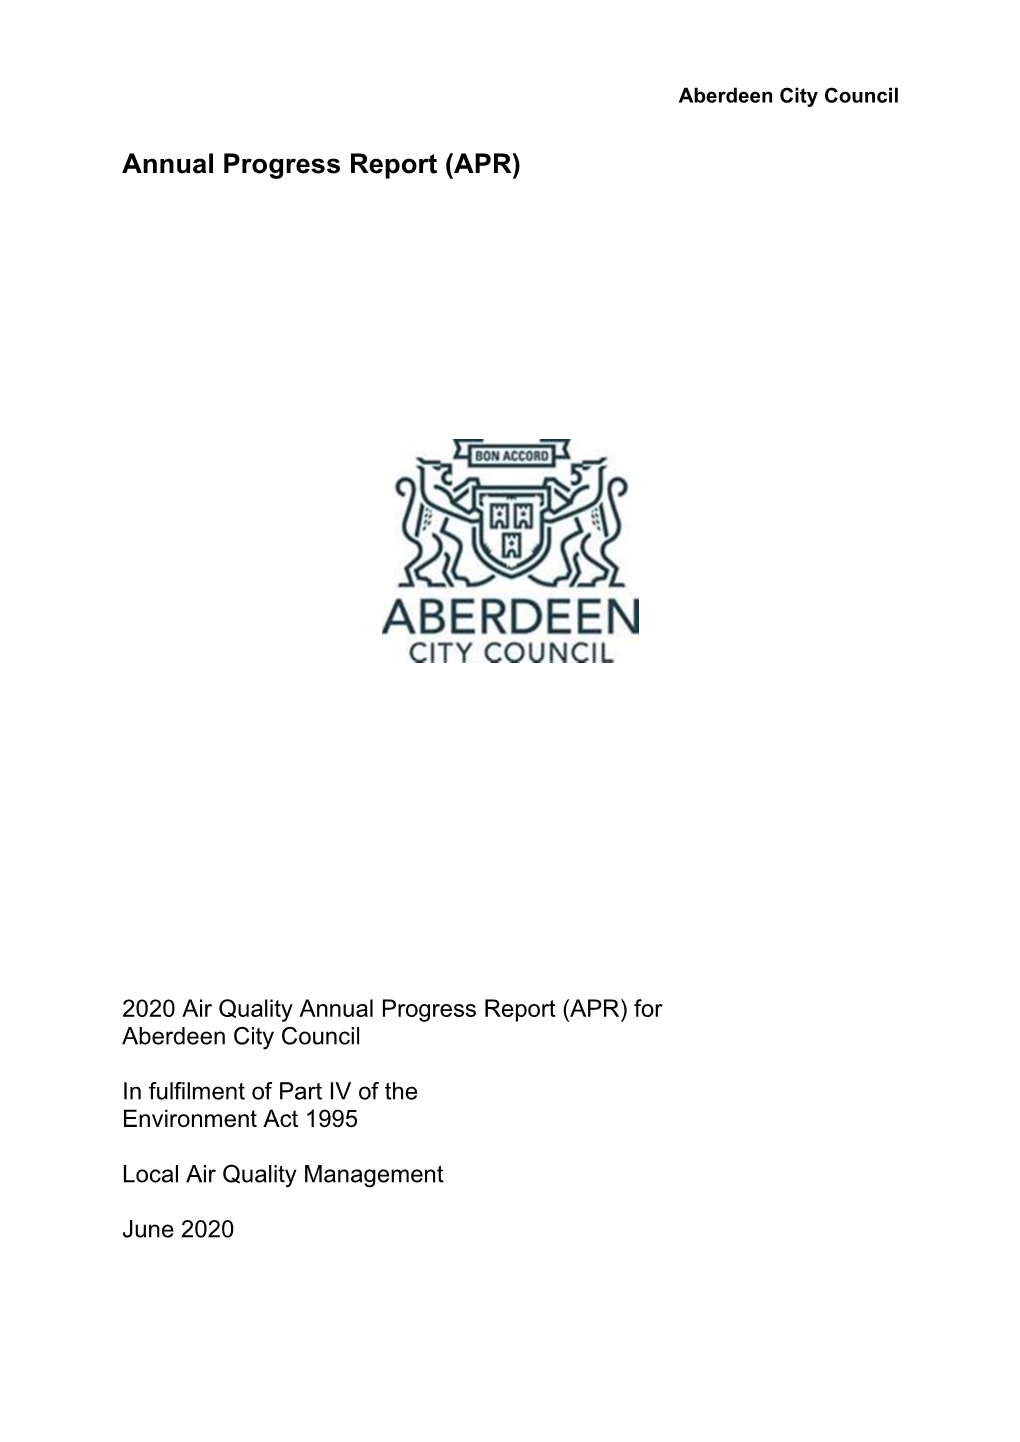 2020 Air Quality Annual Progress Report (APR) for Aberdeen City Council